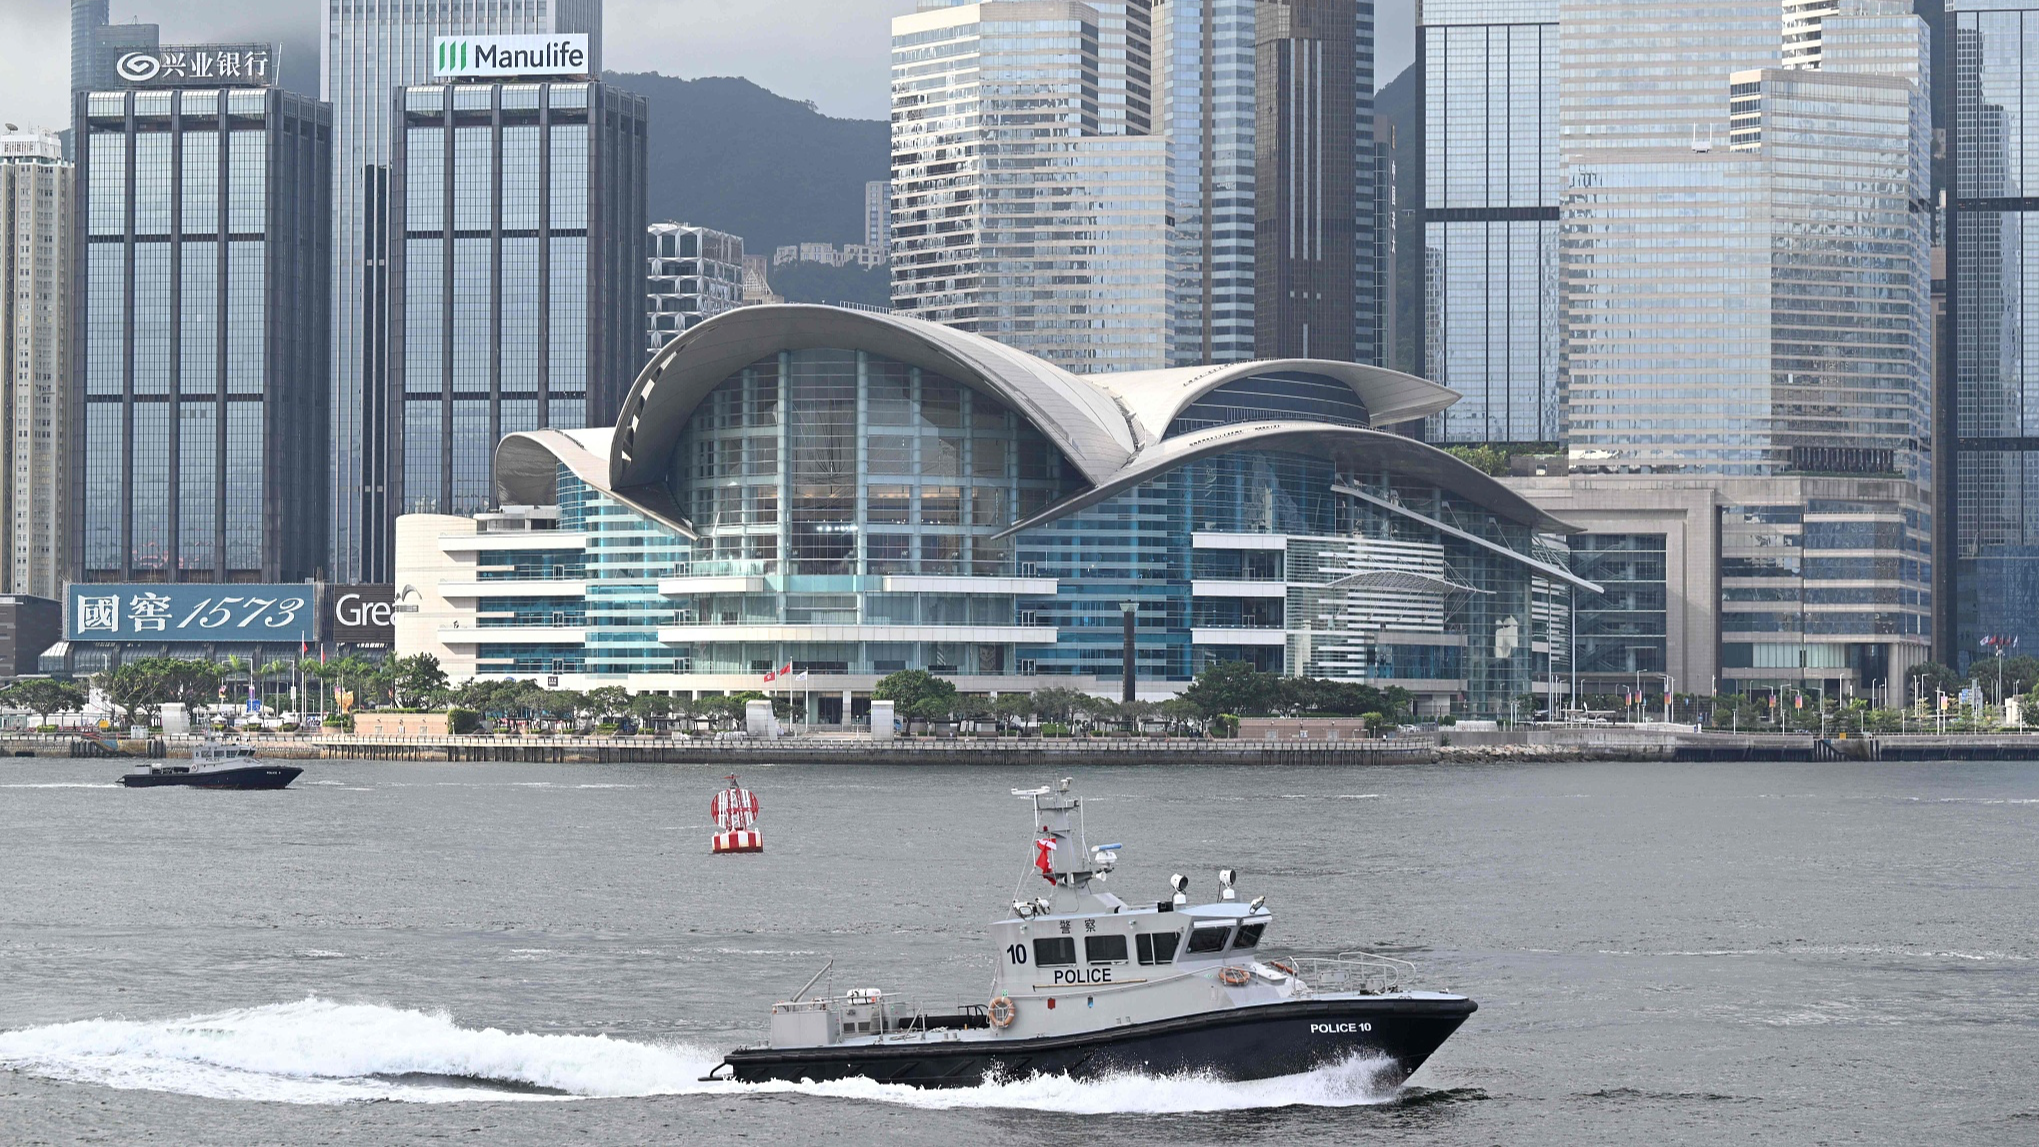 Police boats pass by Hong Kong's Victoria Harbour as the city marks the 27th anniversary of the handover of Hong Kong from Britain to China on July 1, 2024. Photo by Peter PARKS/CFP